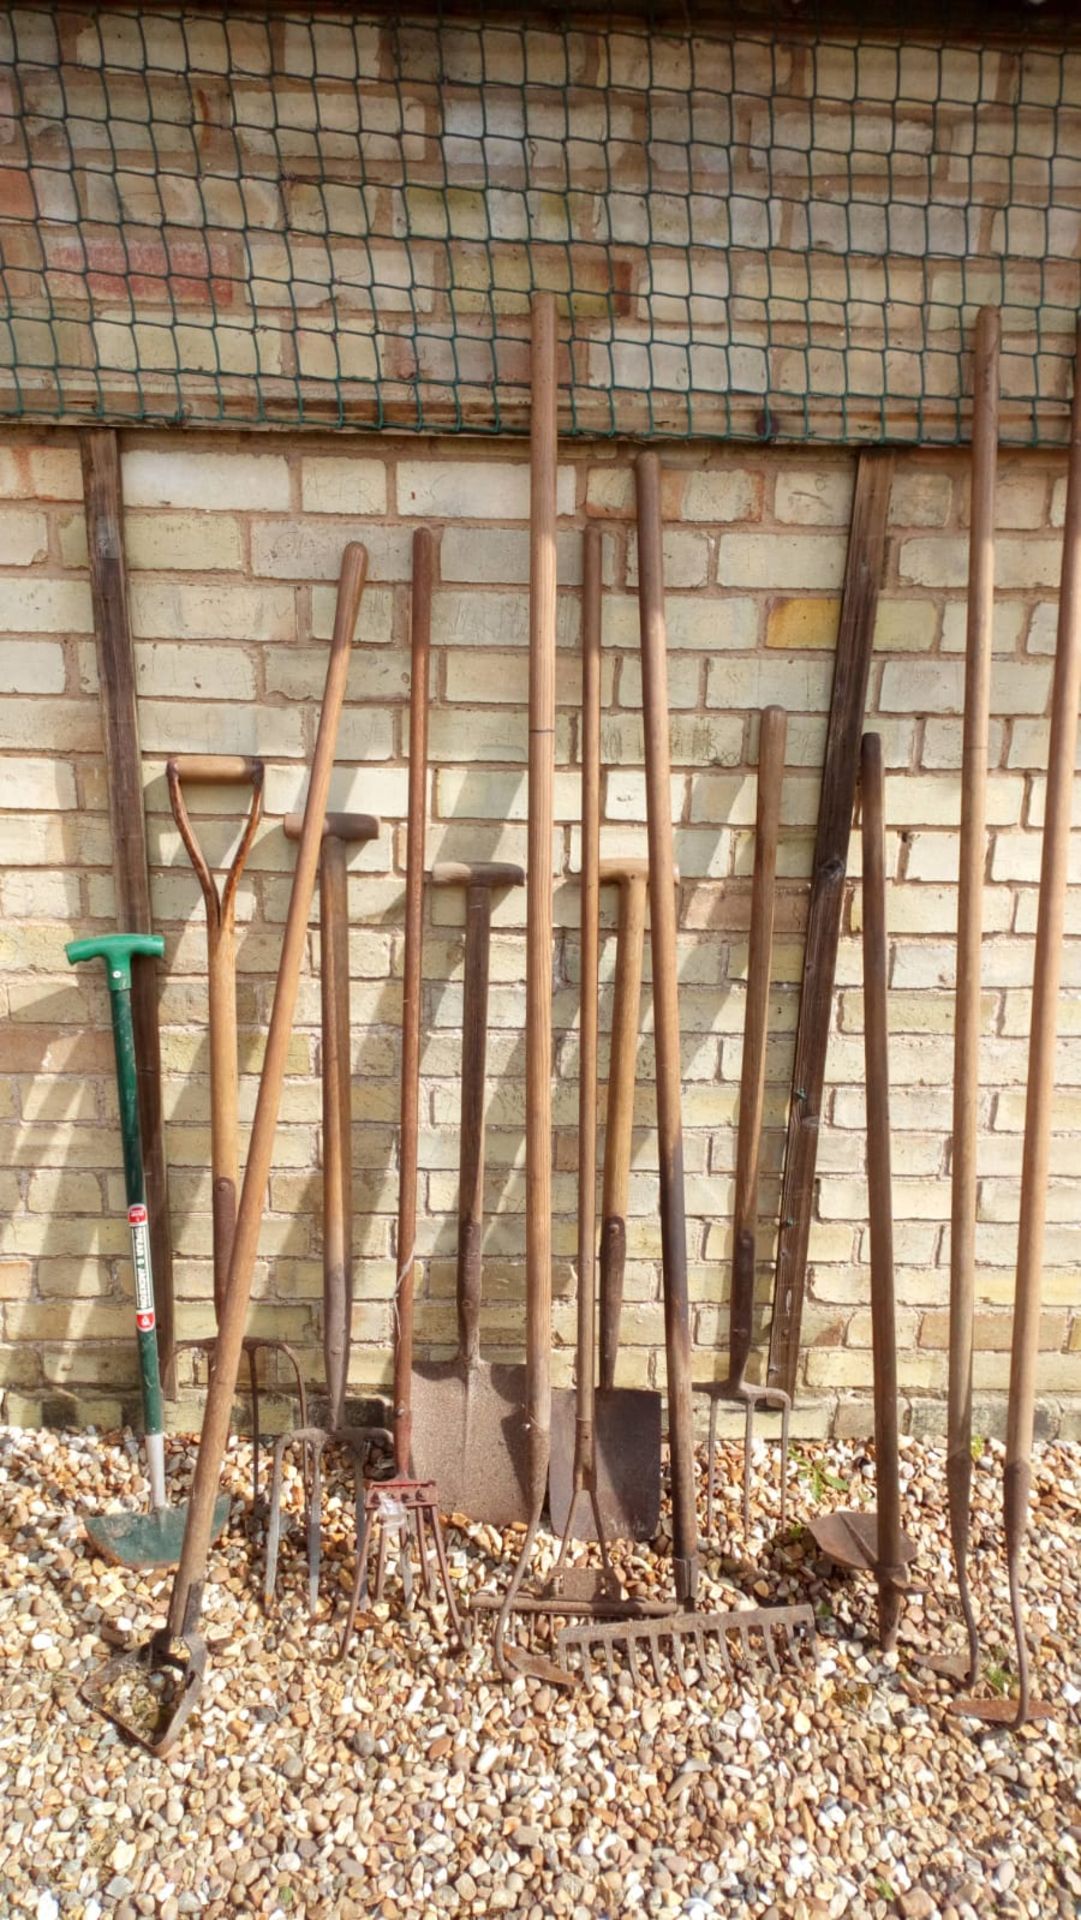 Collection of gardening tools